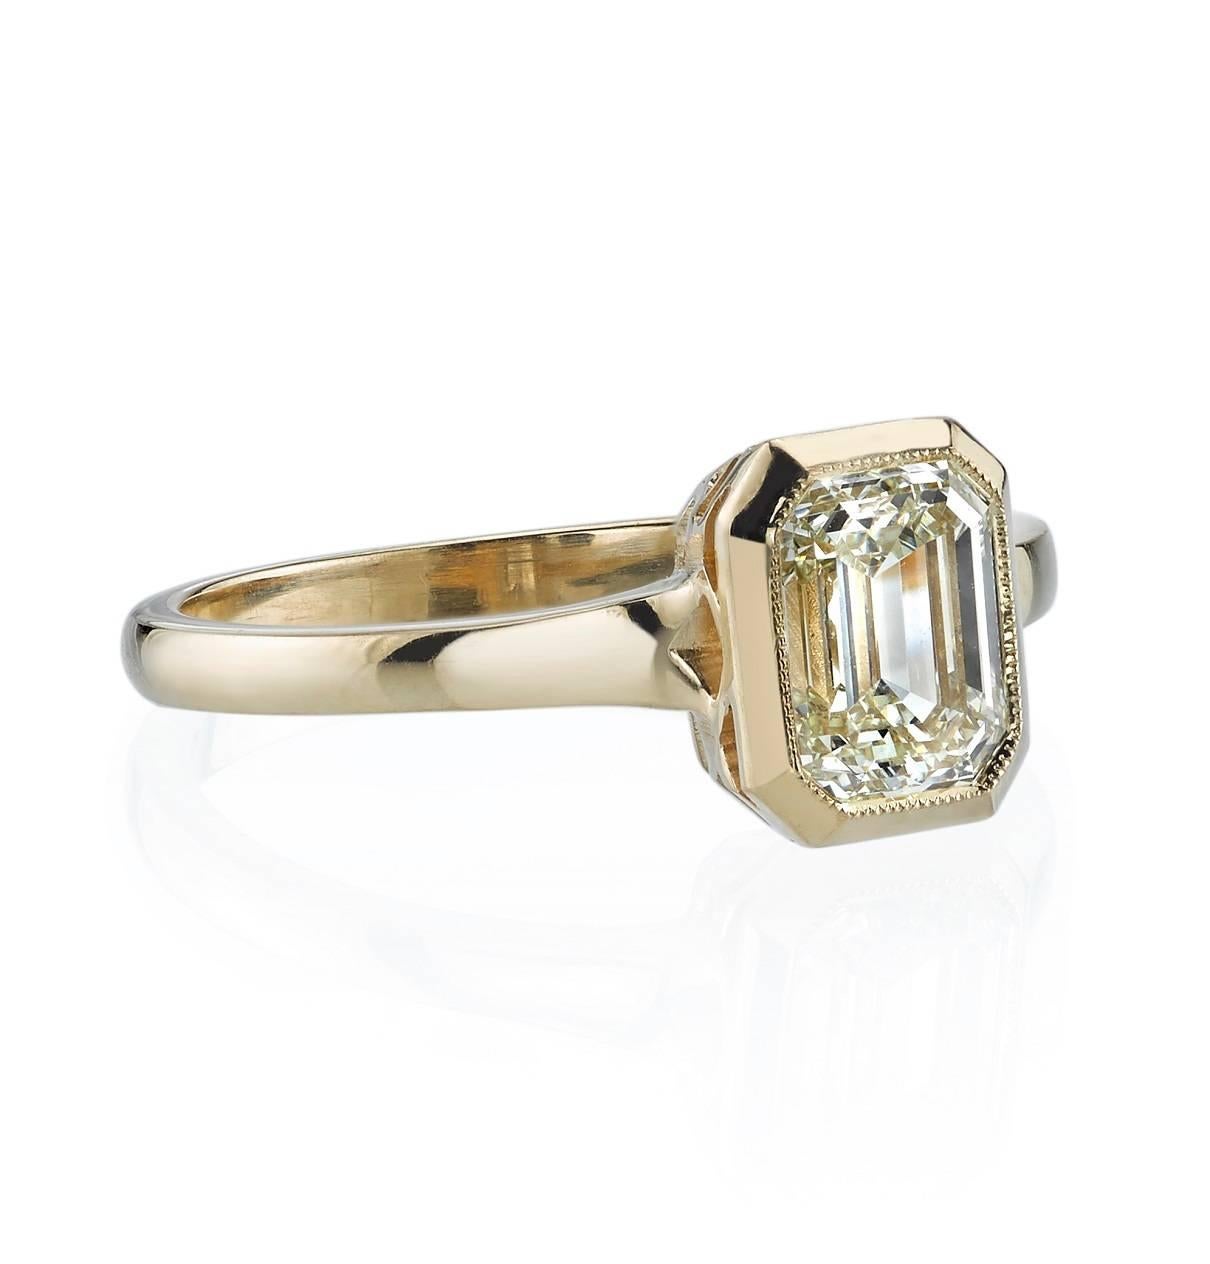 1.20ct N/VS1 Emerald cut diamond GIA certified and set in a handcrafted 18k yellow gold mounting.